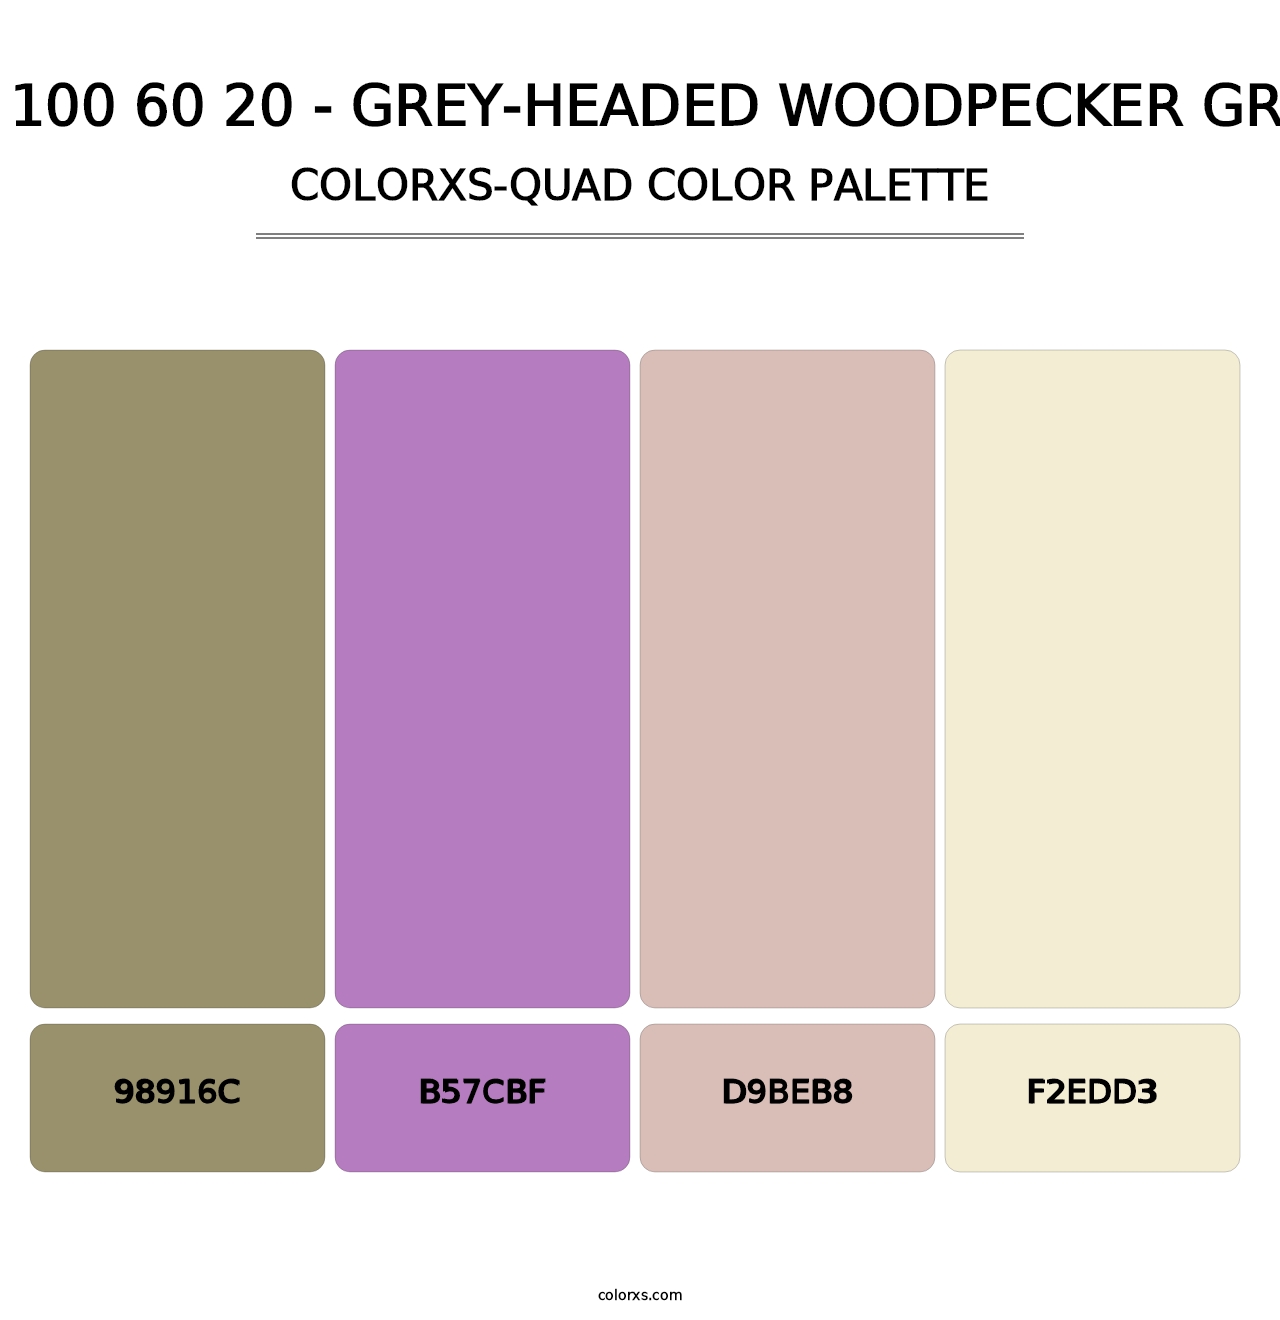 RAL 100 60 20 - Grey-Headed Woodpecker Green - Colorxs Quad Palette